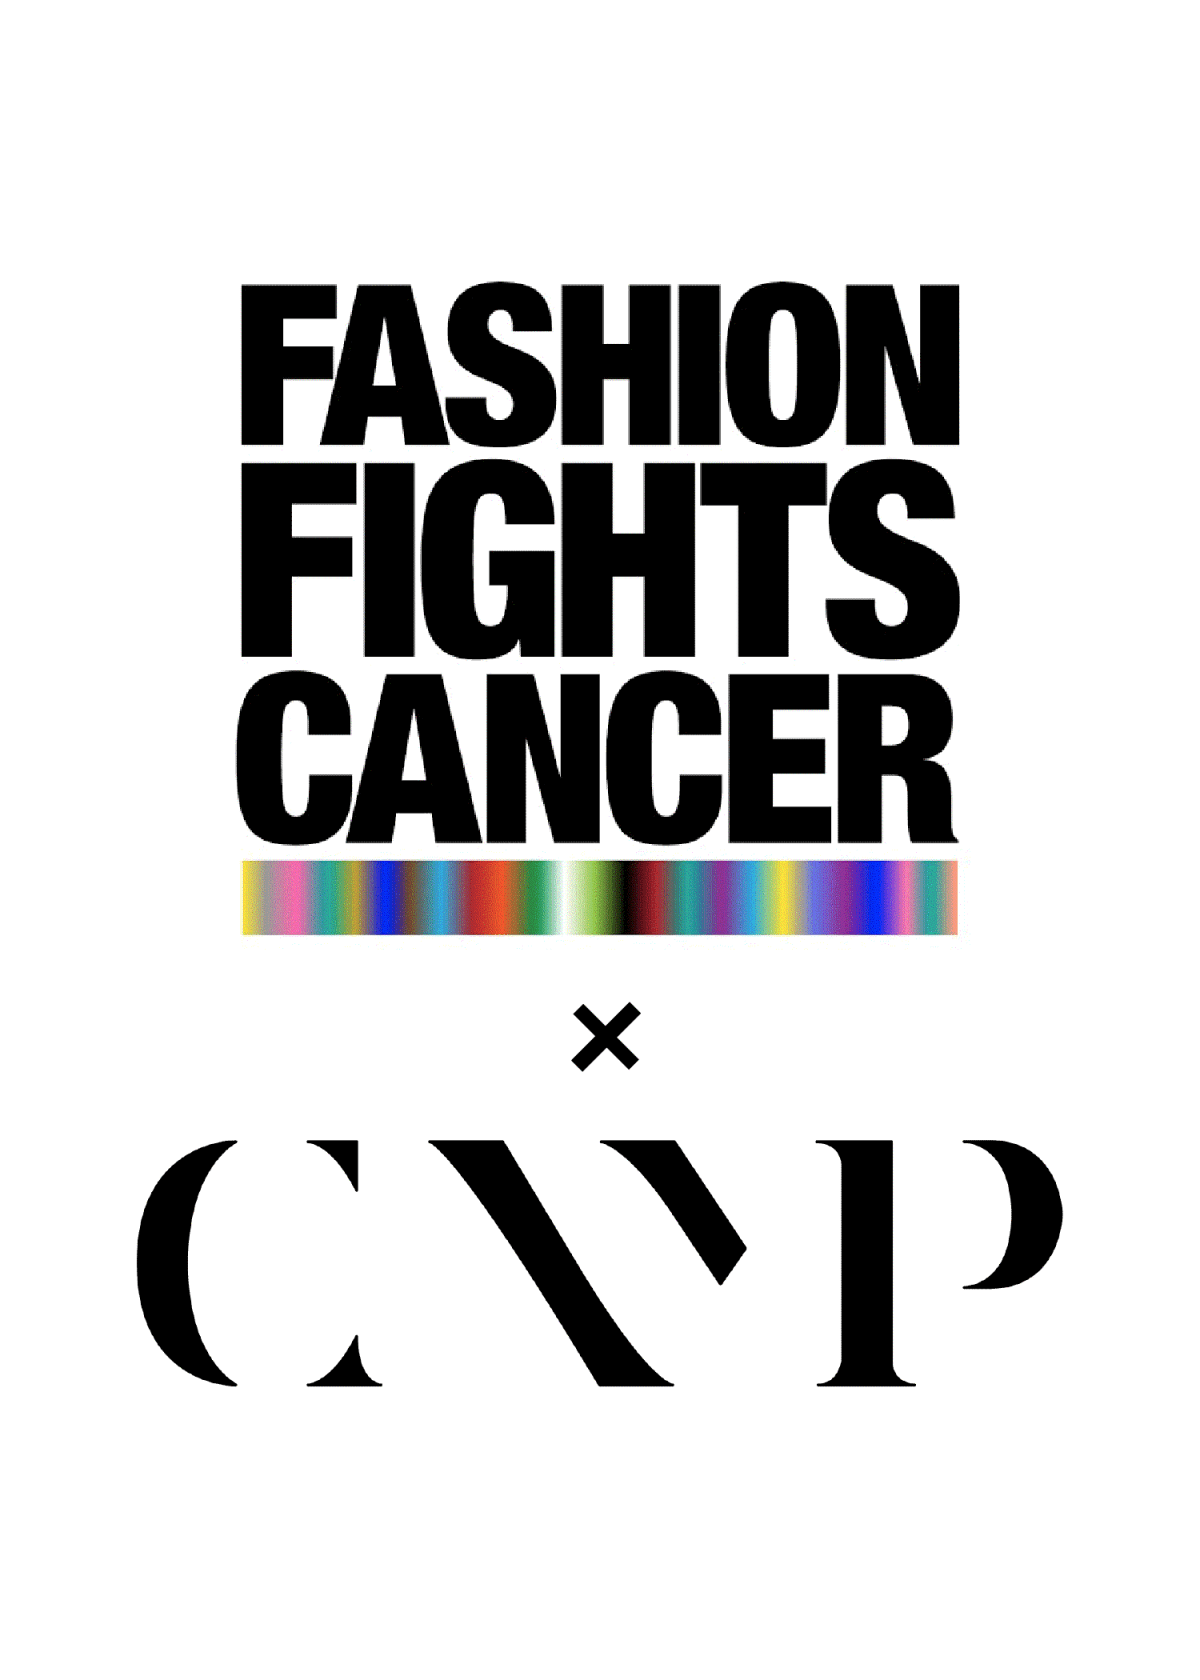 The CAMP Gallery and Fashion Fights Cancer collaborate for National Cancer Prevention Month exhibition